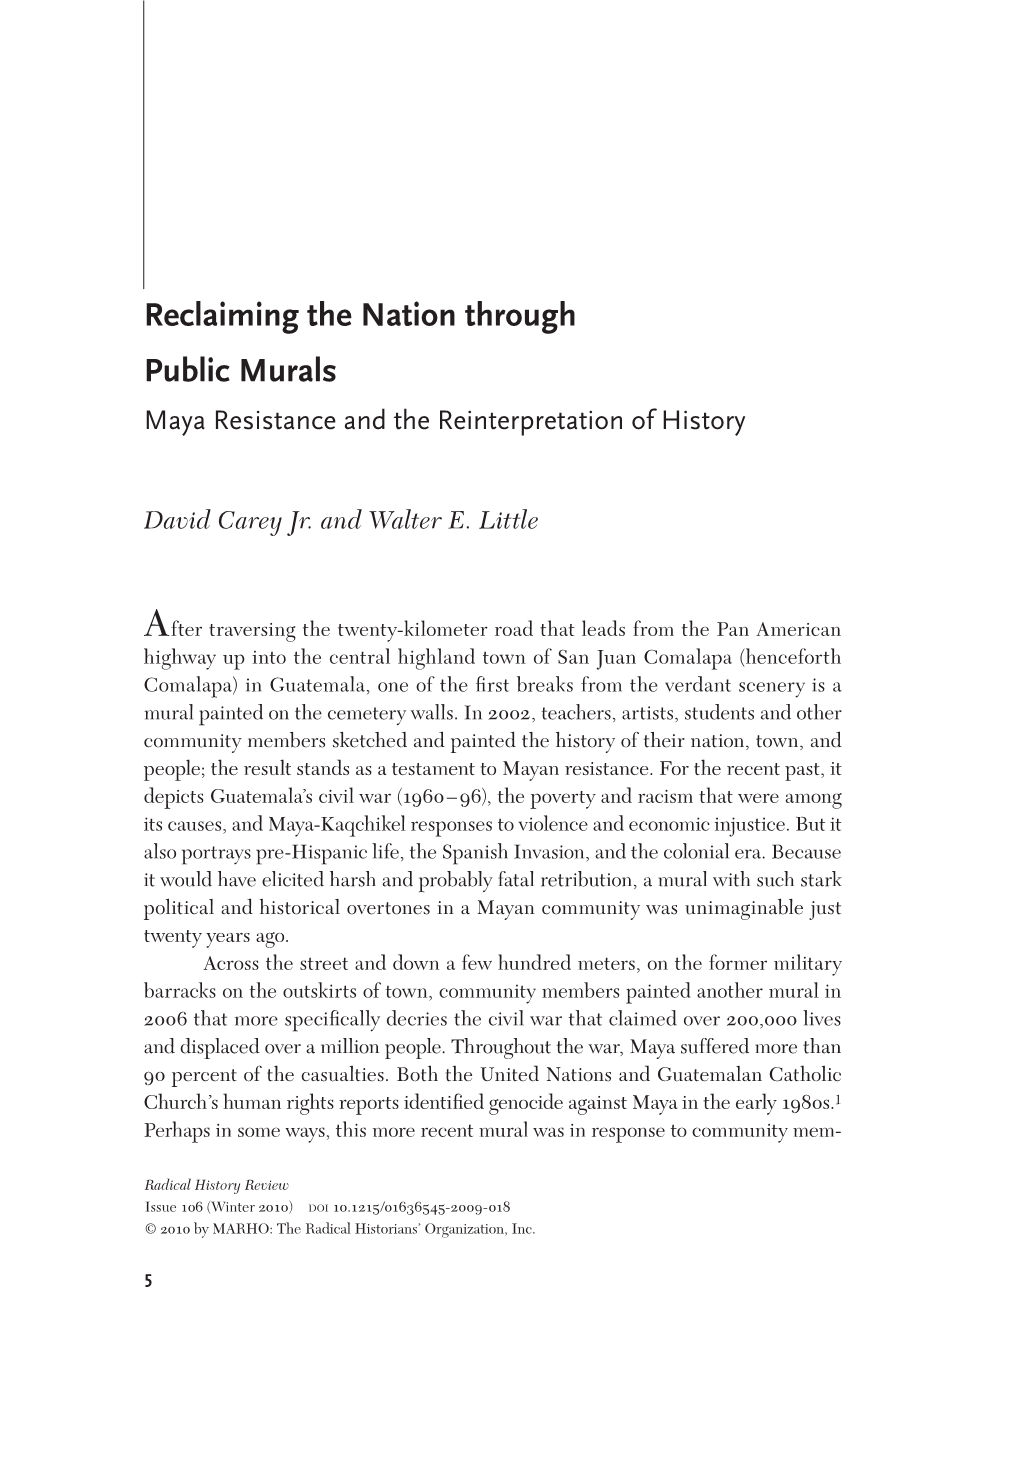 Reclaiming the Nation Through Public Murals Maya Resistance and the Reinterpretation of History